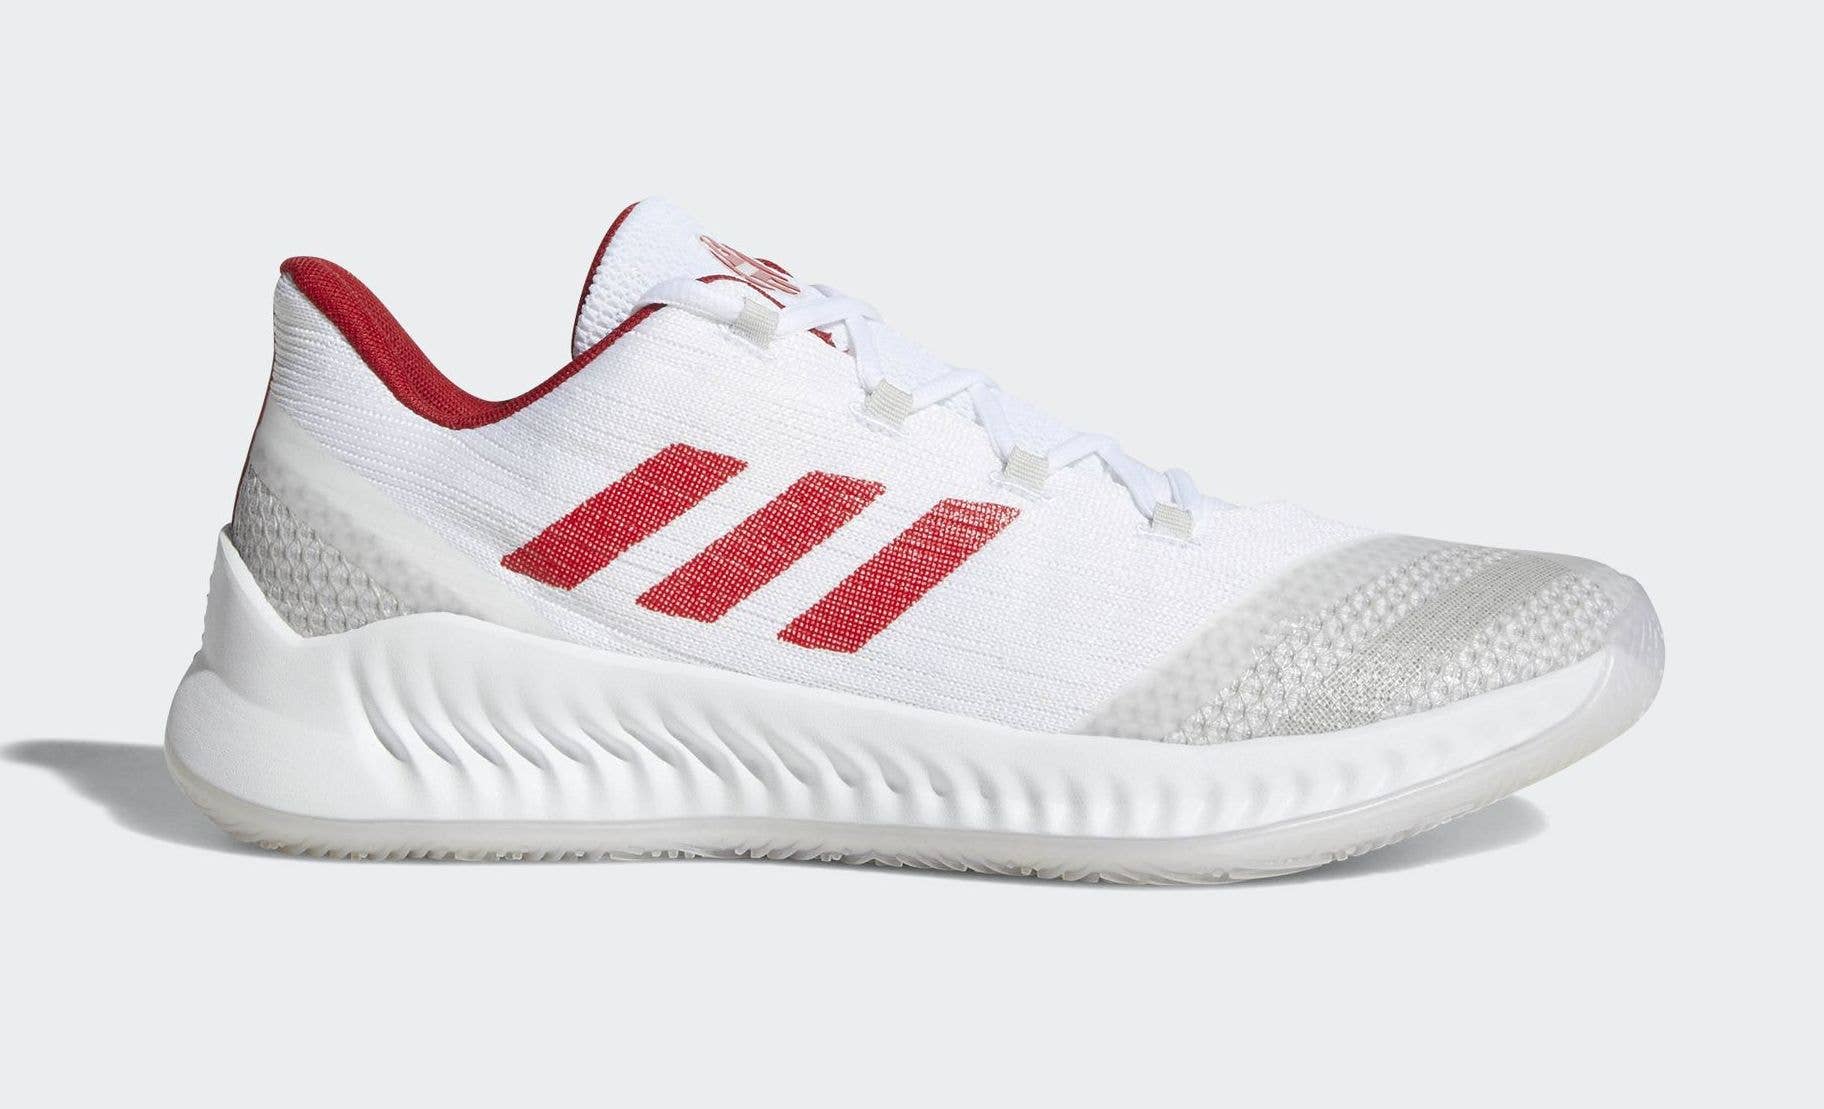 Adidas Harden B/E 2 'White/Red' (Lateral)